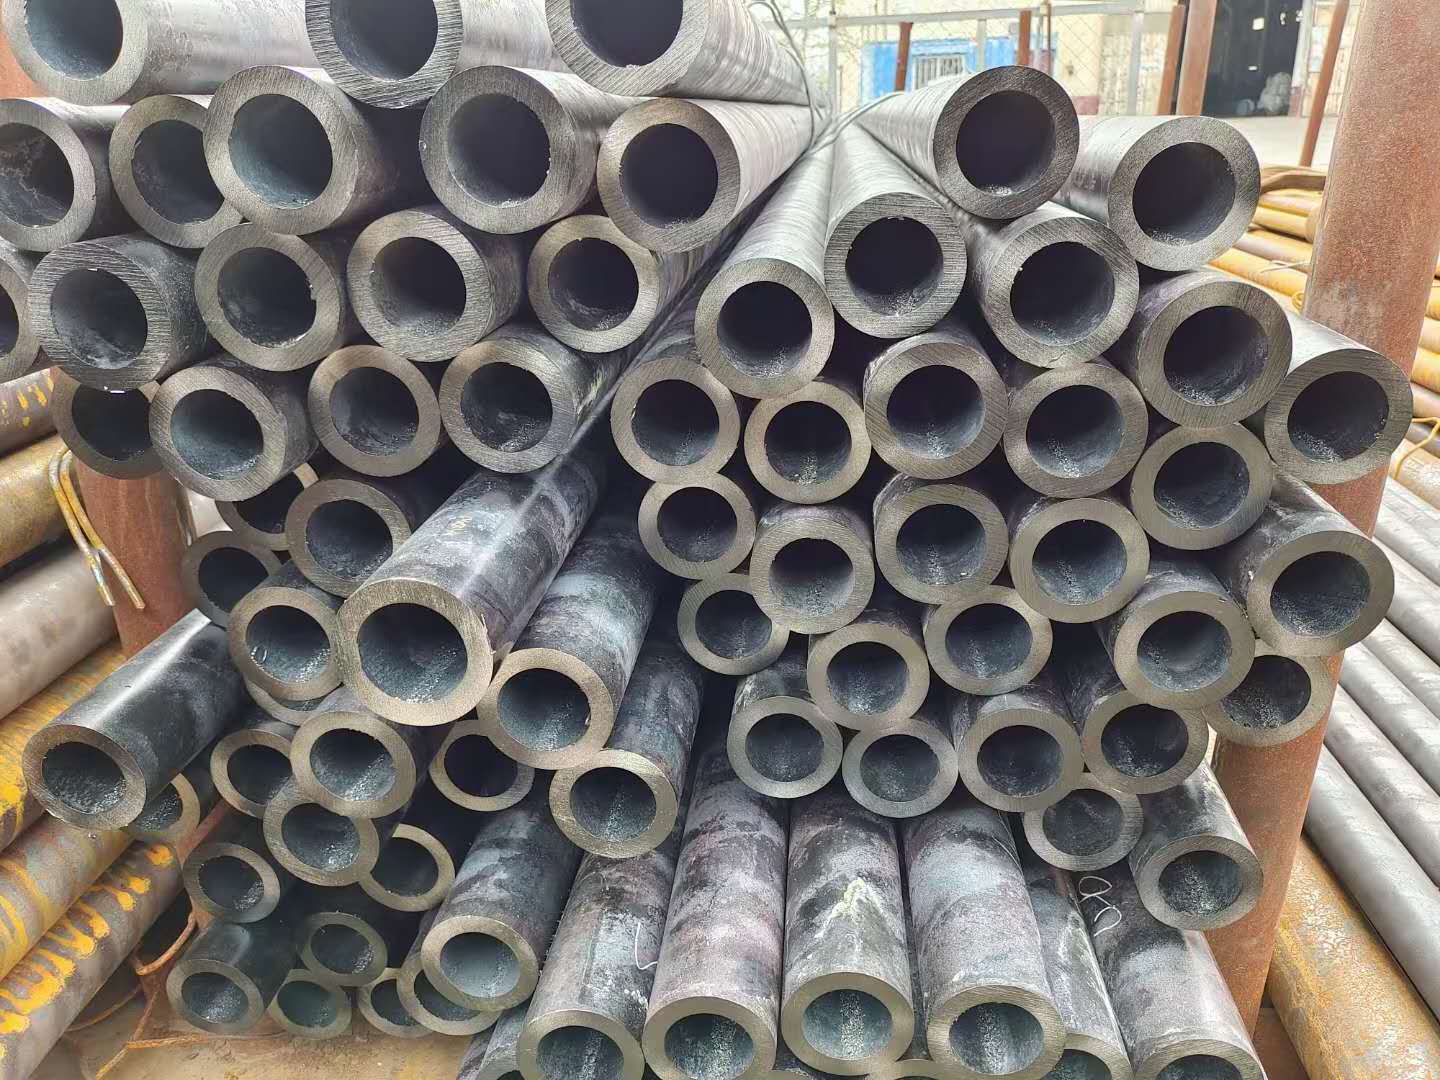 Discuss the significance of machined steel pipe and structural steel pipe